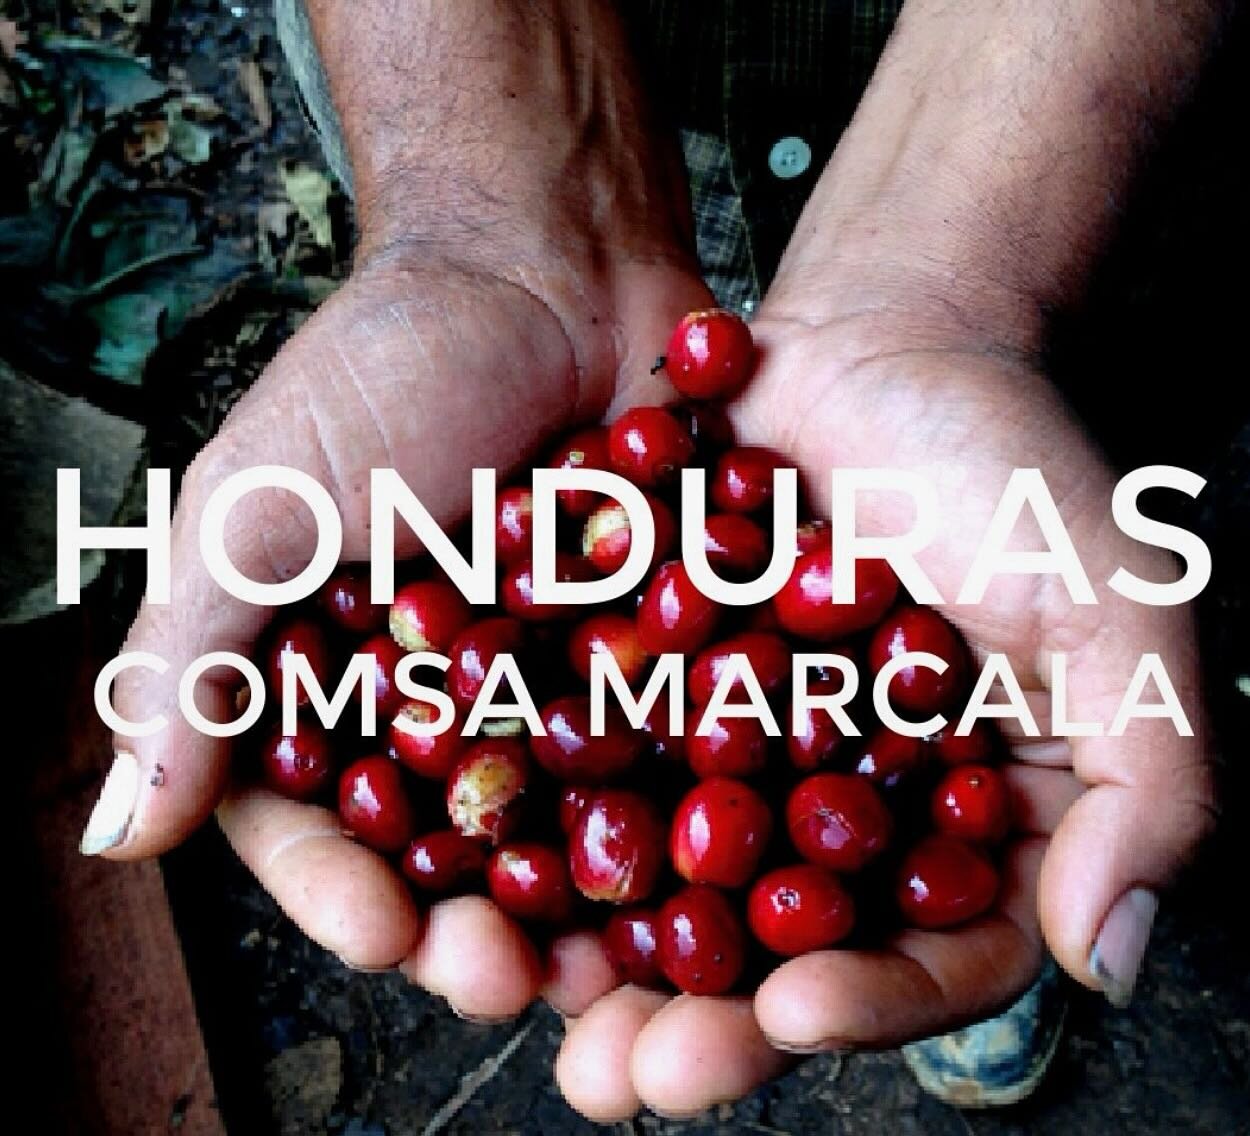 Honduras COMSA Marcala SHG

Certifications: Fair Trade and Organic
Elevation: 1220 to 1524 meters
Varietals: Catuai, Caturra, Bourbon, Typica
Milling Process: Fully Washed
Drying Process: Mechanical
Roast Profile: Medium
Tasting Notes: Milk Chocolate